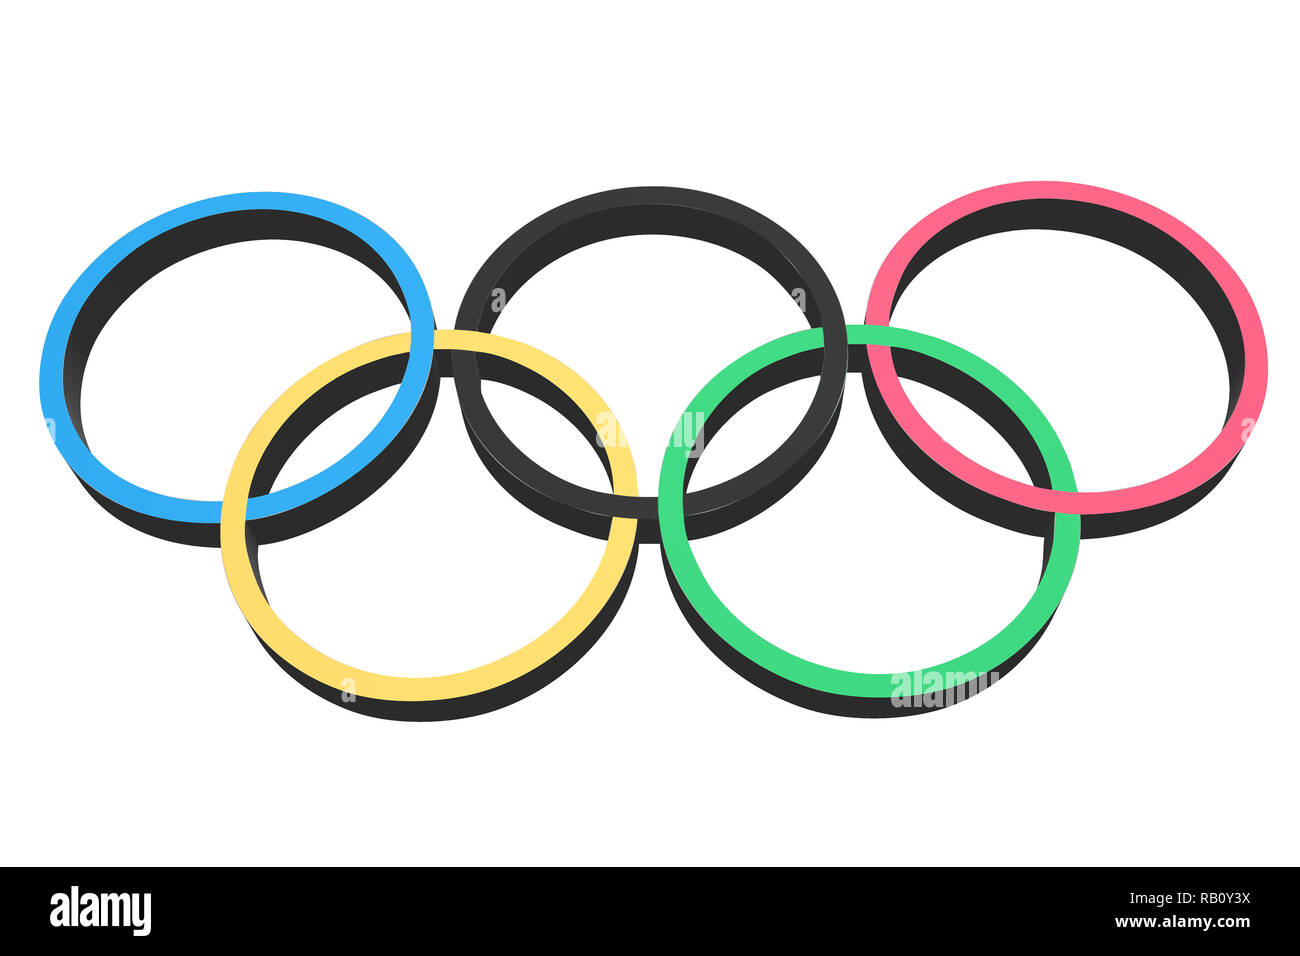 Olympic Rings and Other Things: With Simplicity & Class, New Paris 2024  Logo Fuses Flame, Style, Gold Medals and French Symbolism